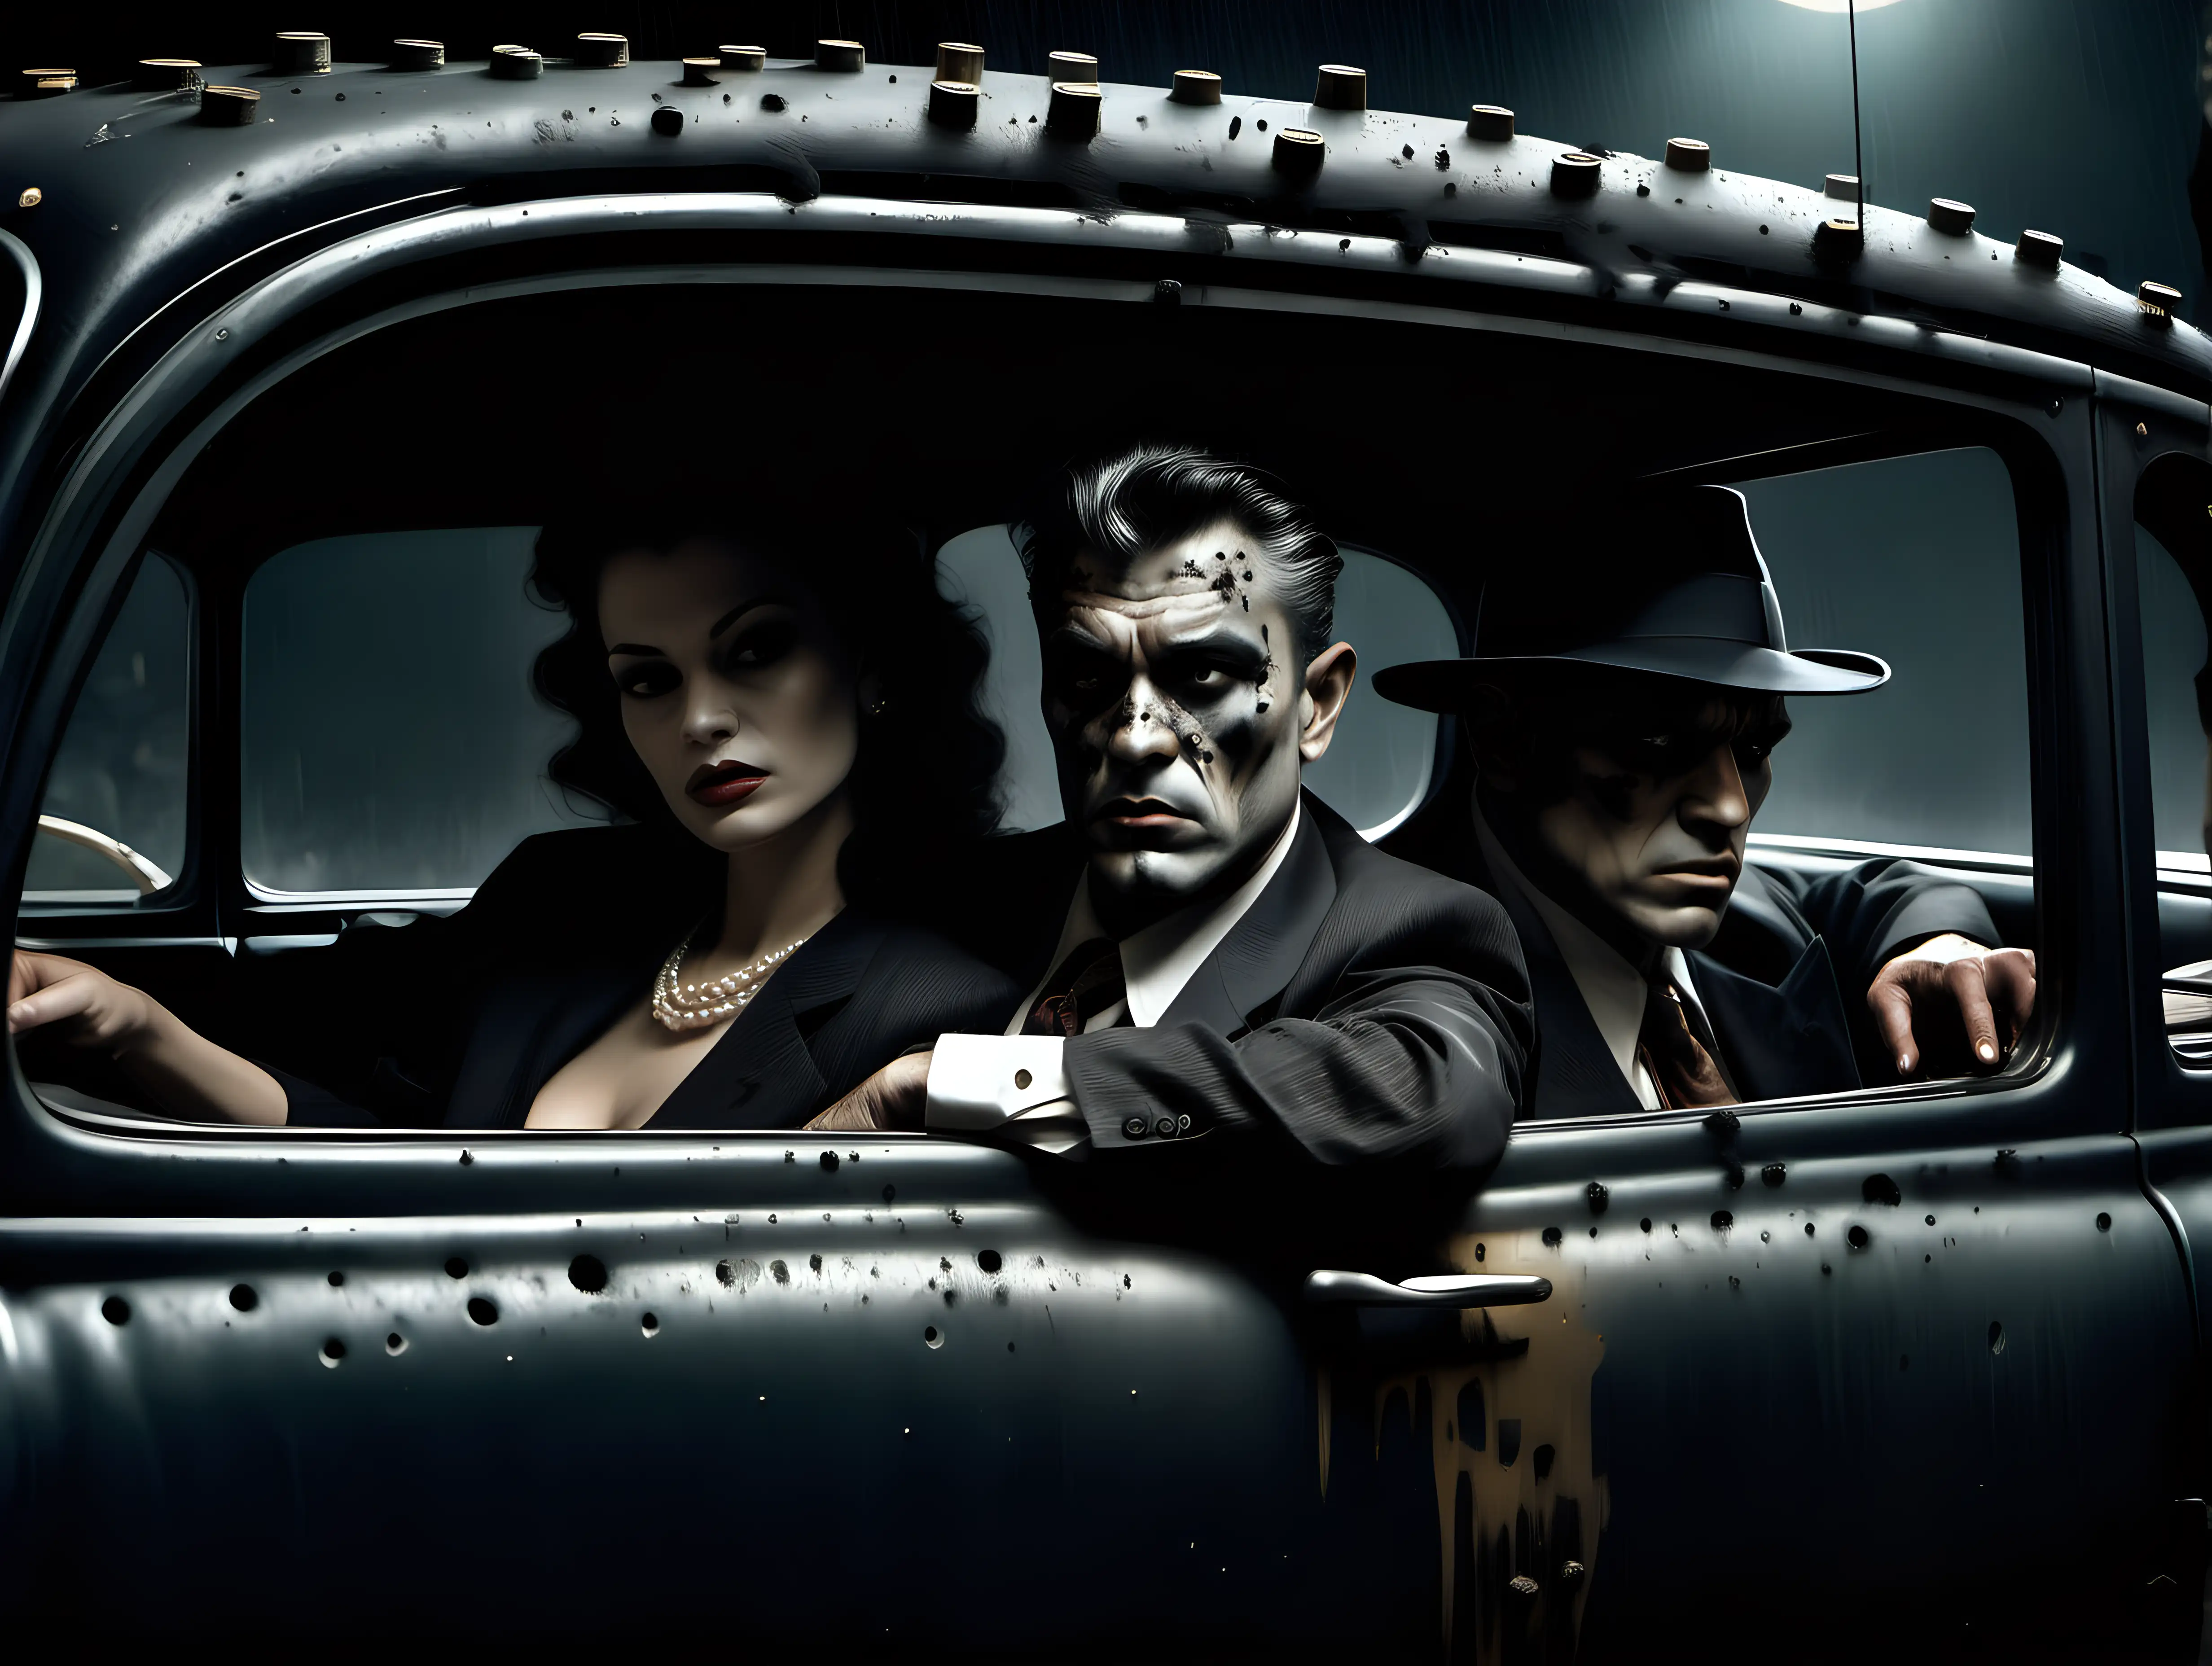 Emotive Realism Gangsters in Car with Bullet Holes